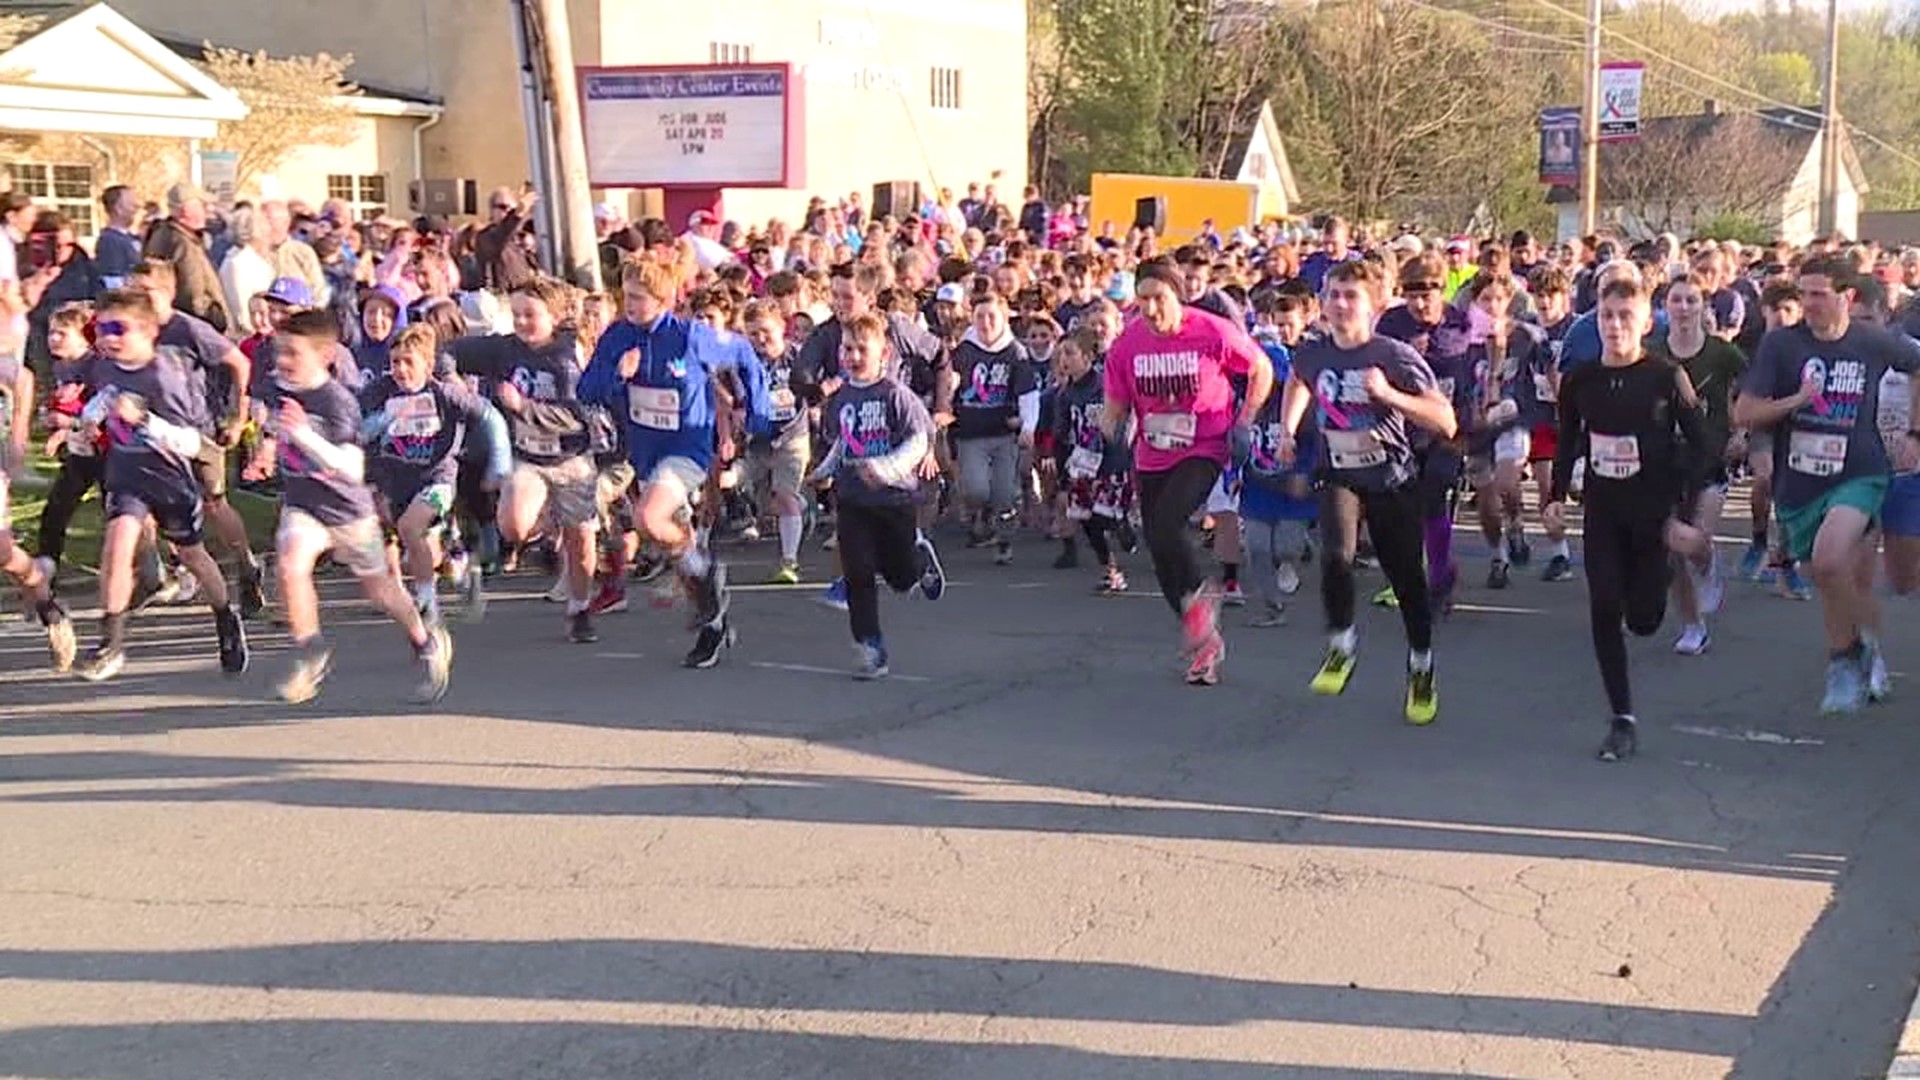 Nearly 2,000 people came out to raise awareness for sudden infant death syndrome (SIDS) at the race in Lackawanna County.